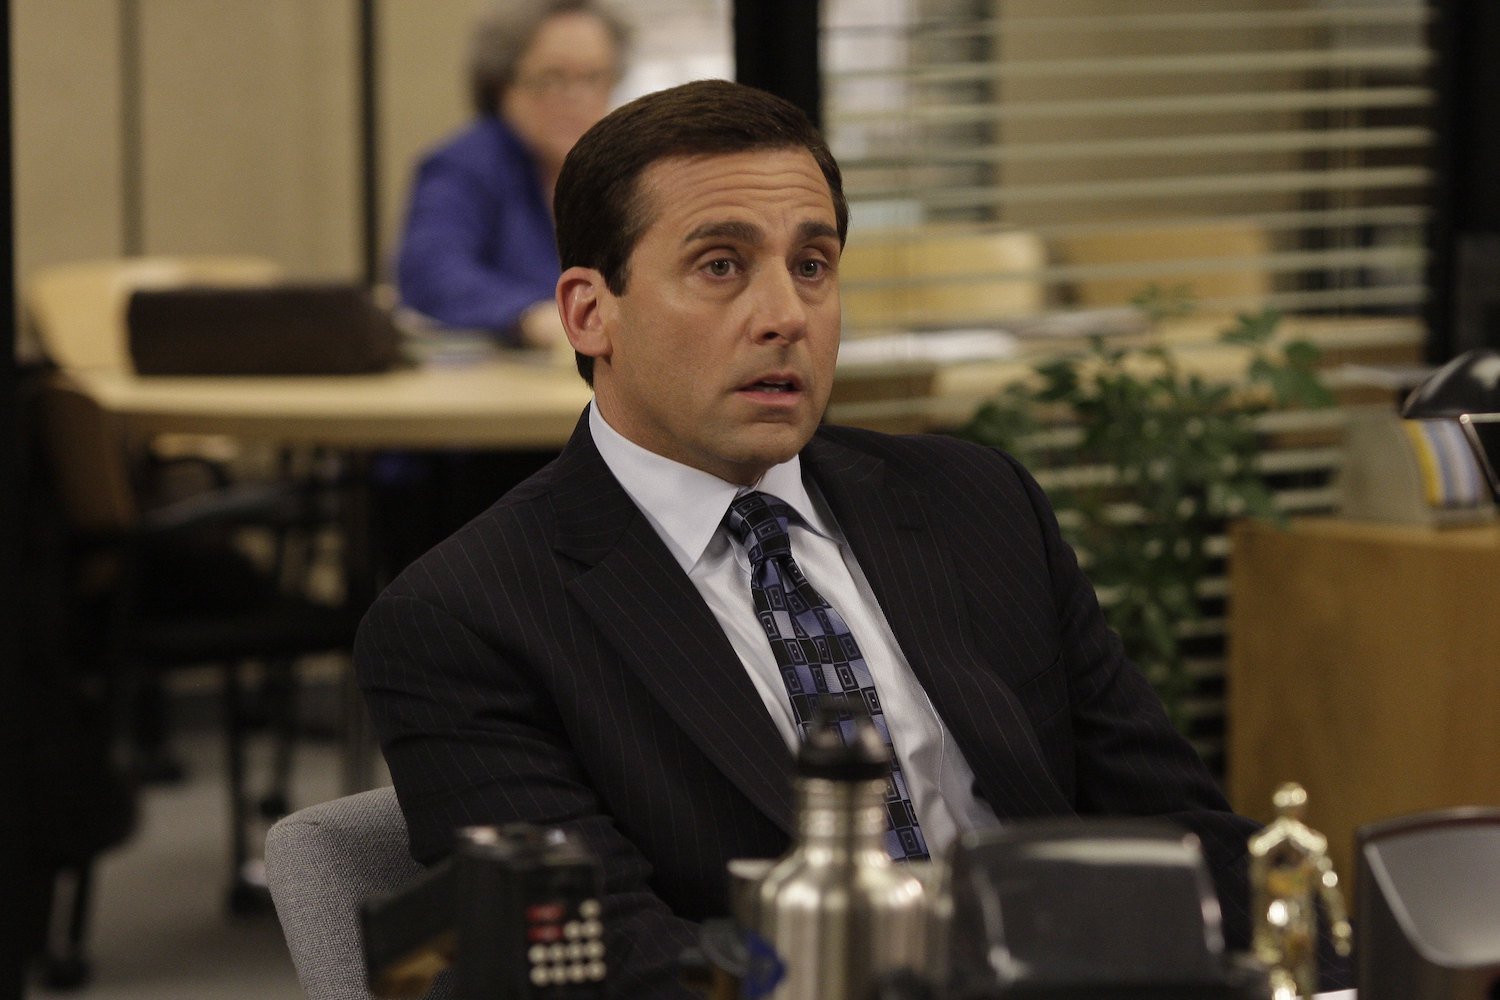 The Office Steve Carell sits at a desk in character as Michael Scott